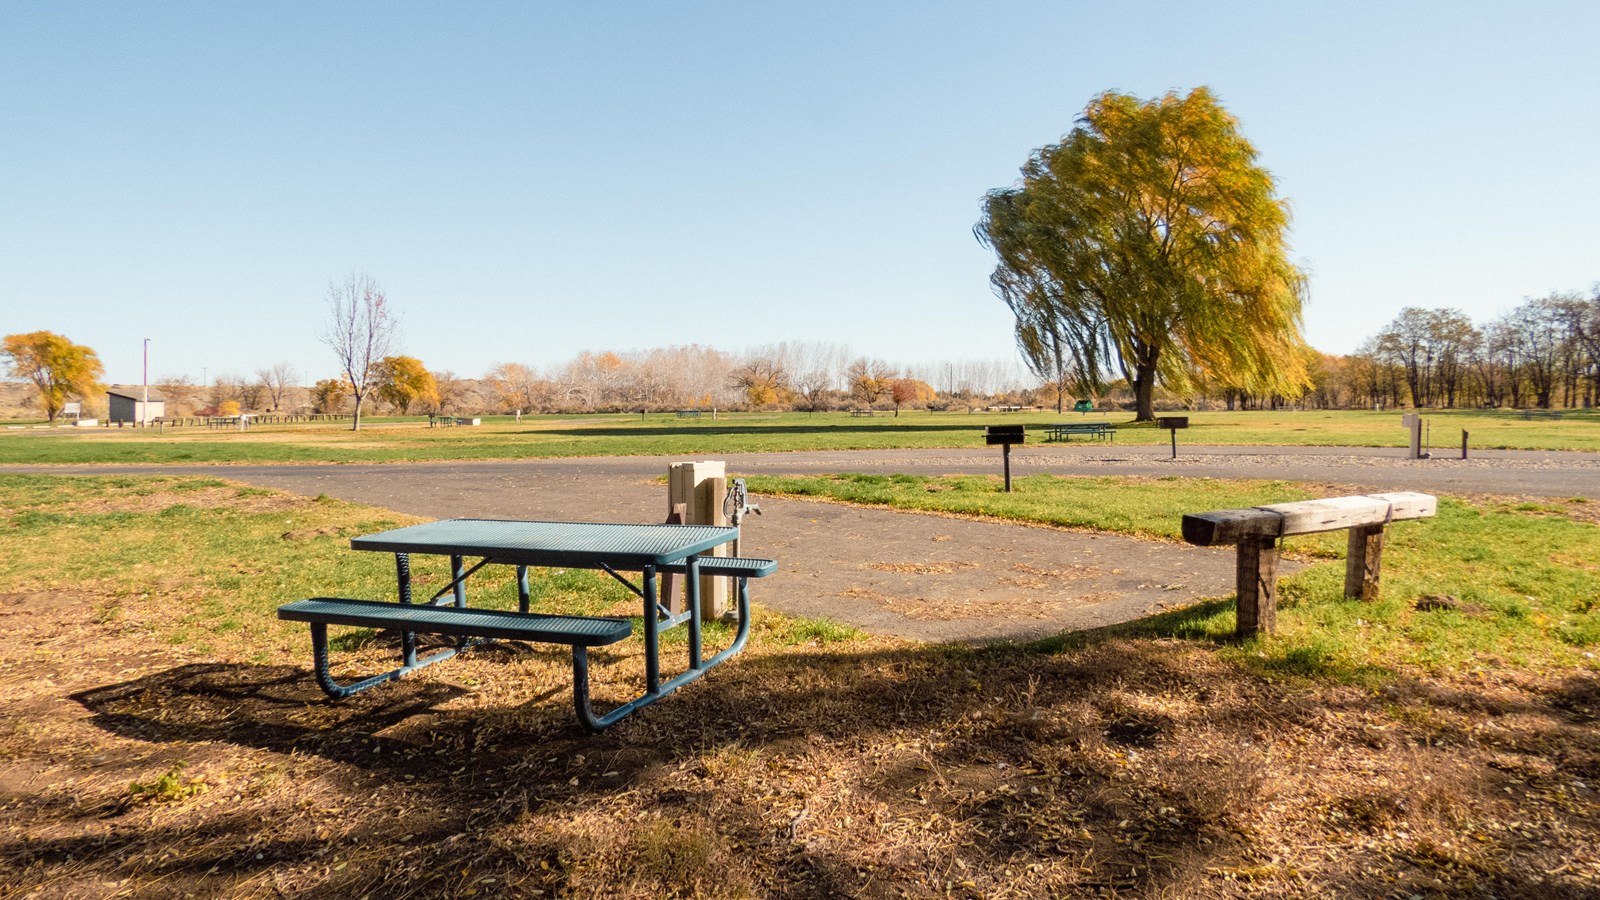 A green picnic table sits in the foreground with green grass and a solitary tree in the background. 